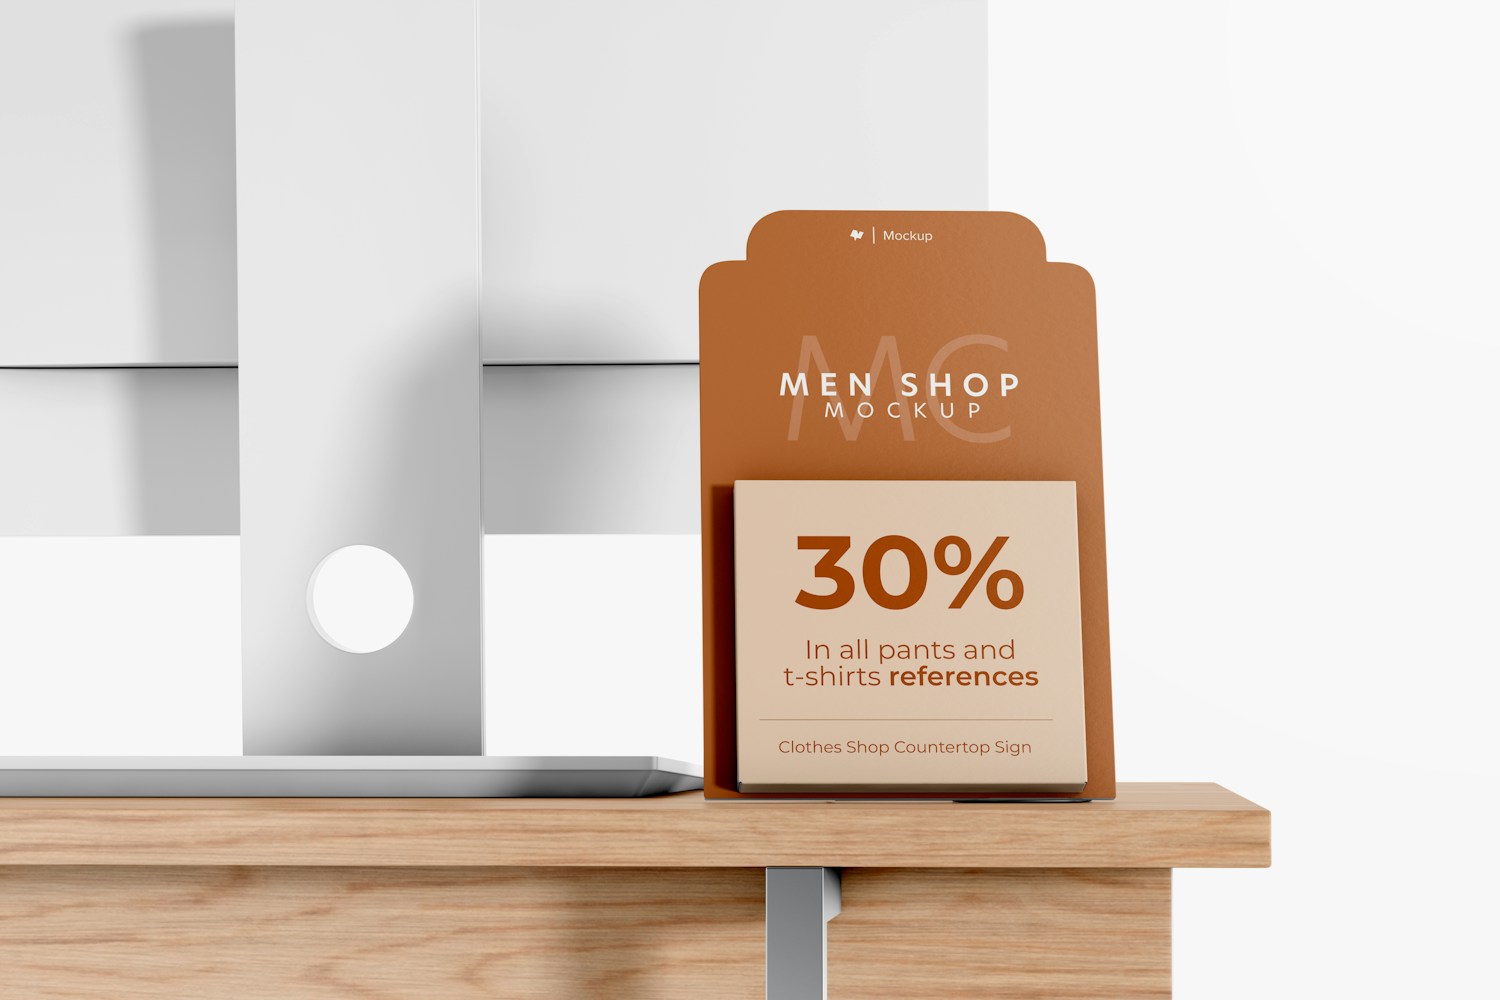 Clothes Shop Countertop Sign Mockup, on Counter